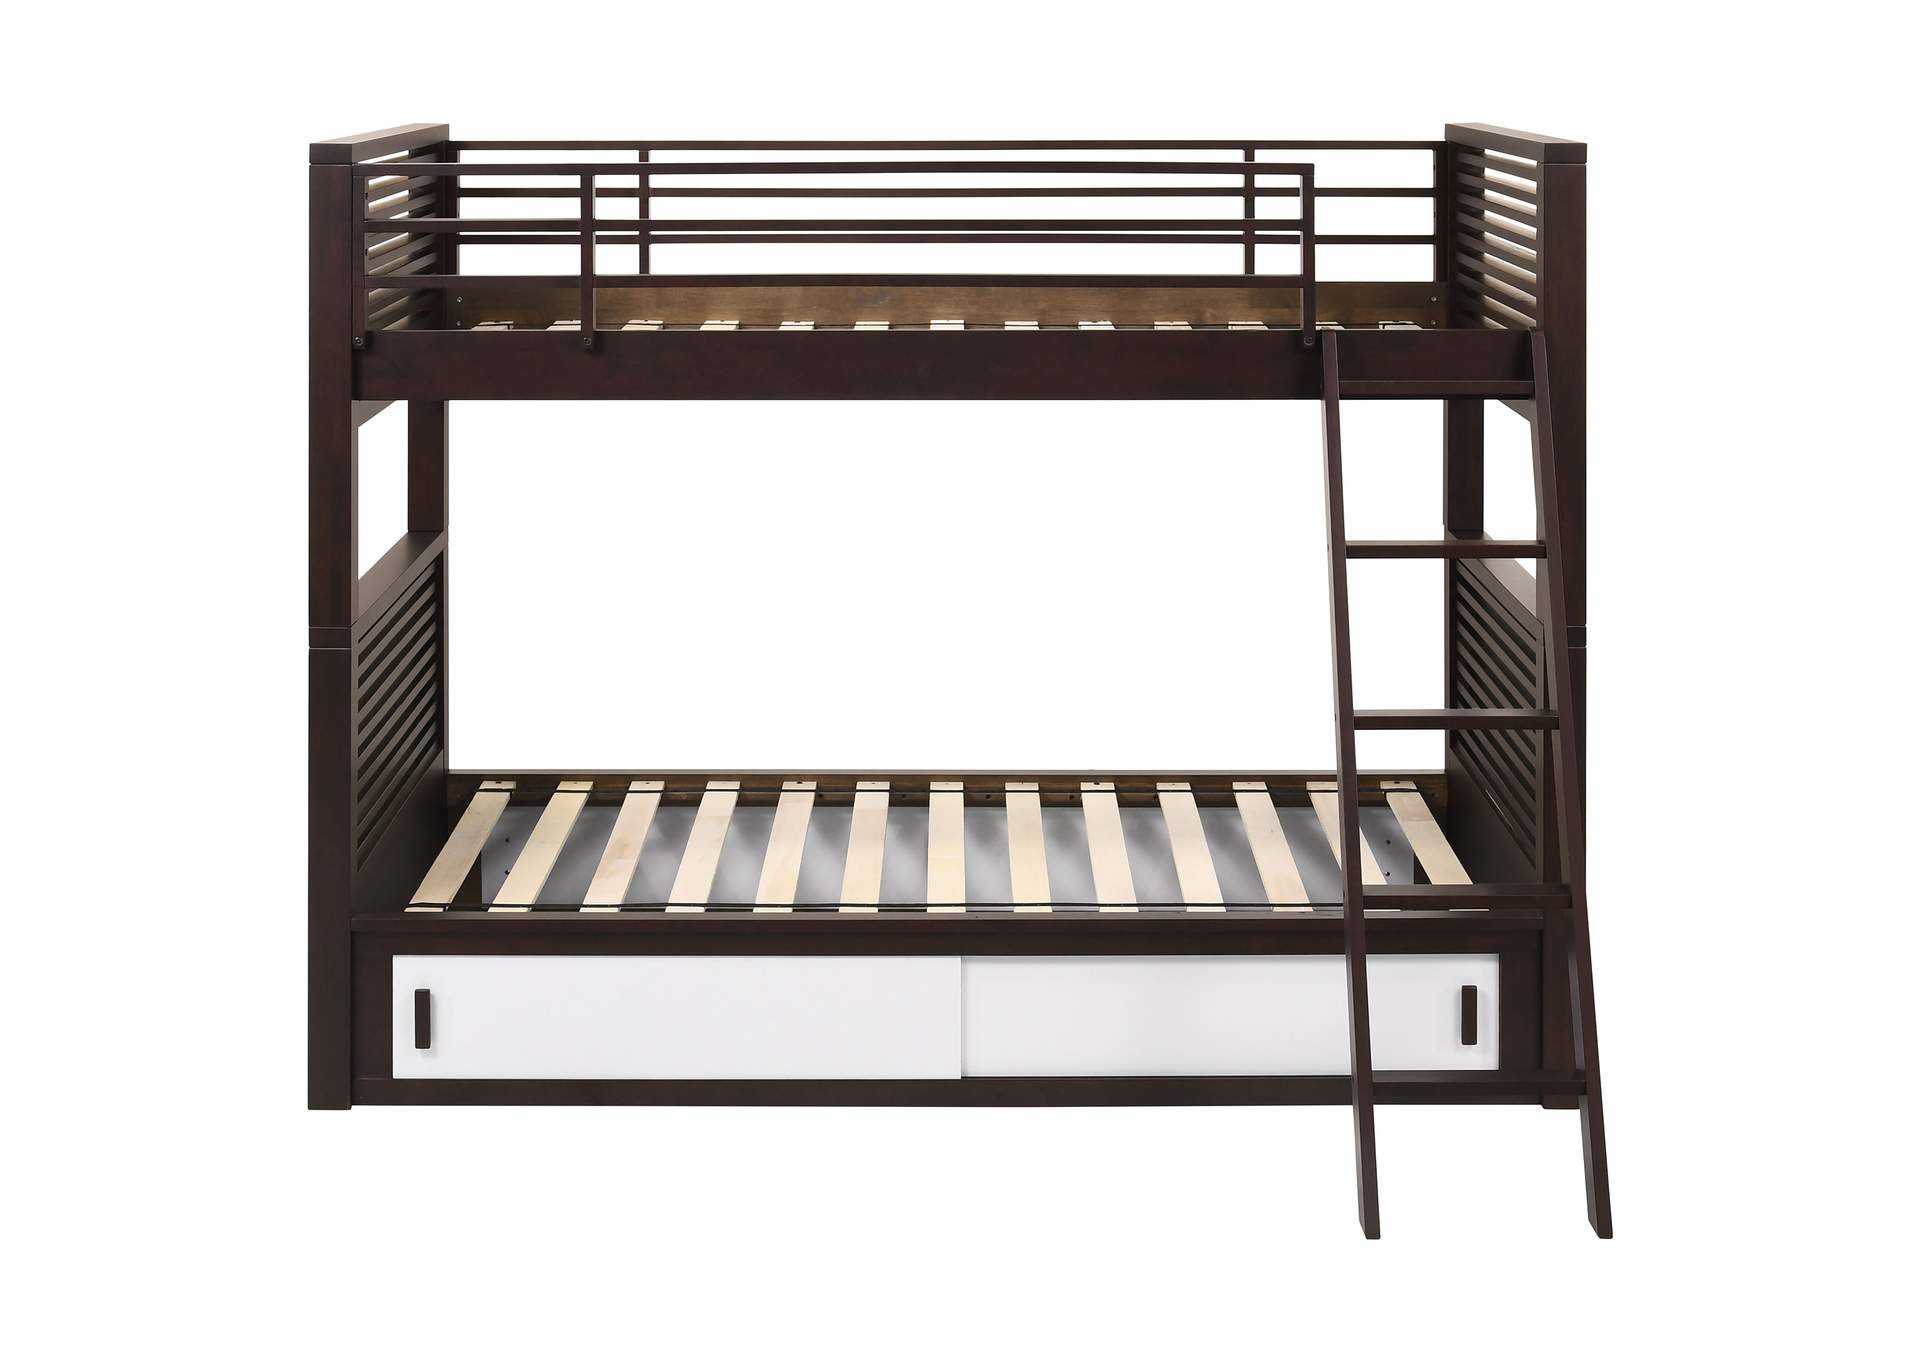 Oliver Twin over Twin Bunk Bed Java,Coaster Furniture